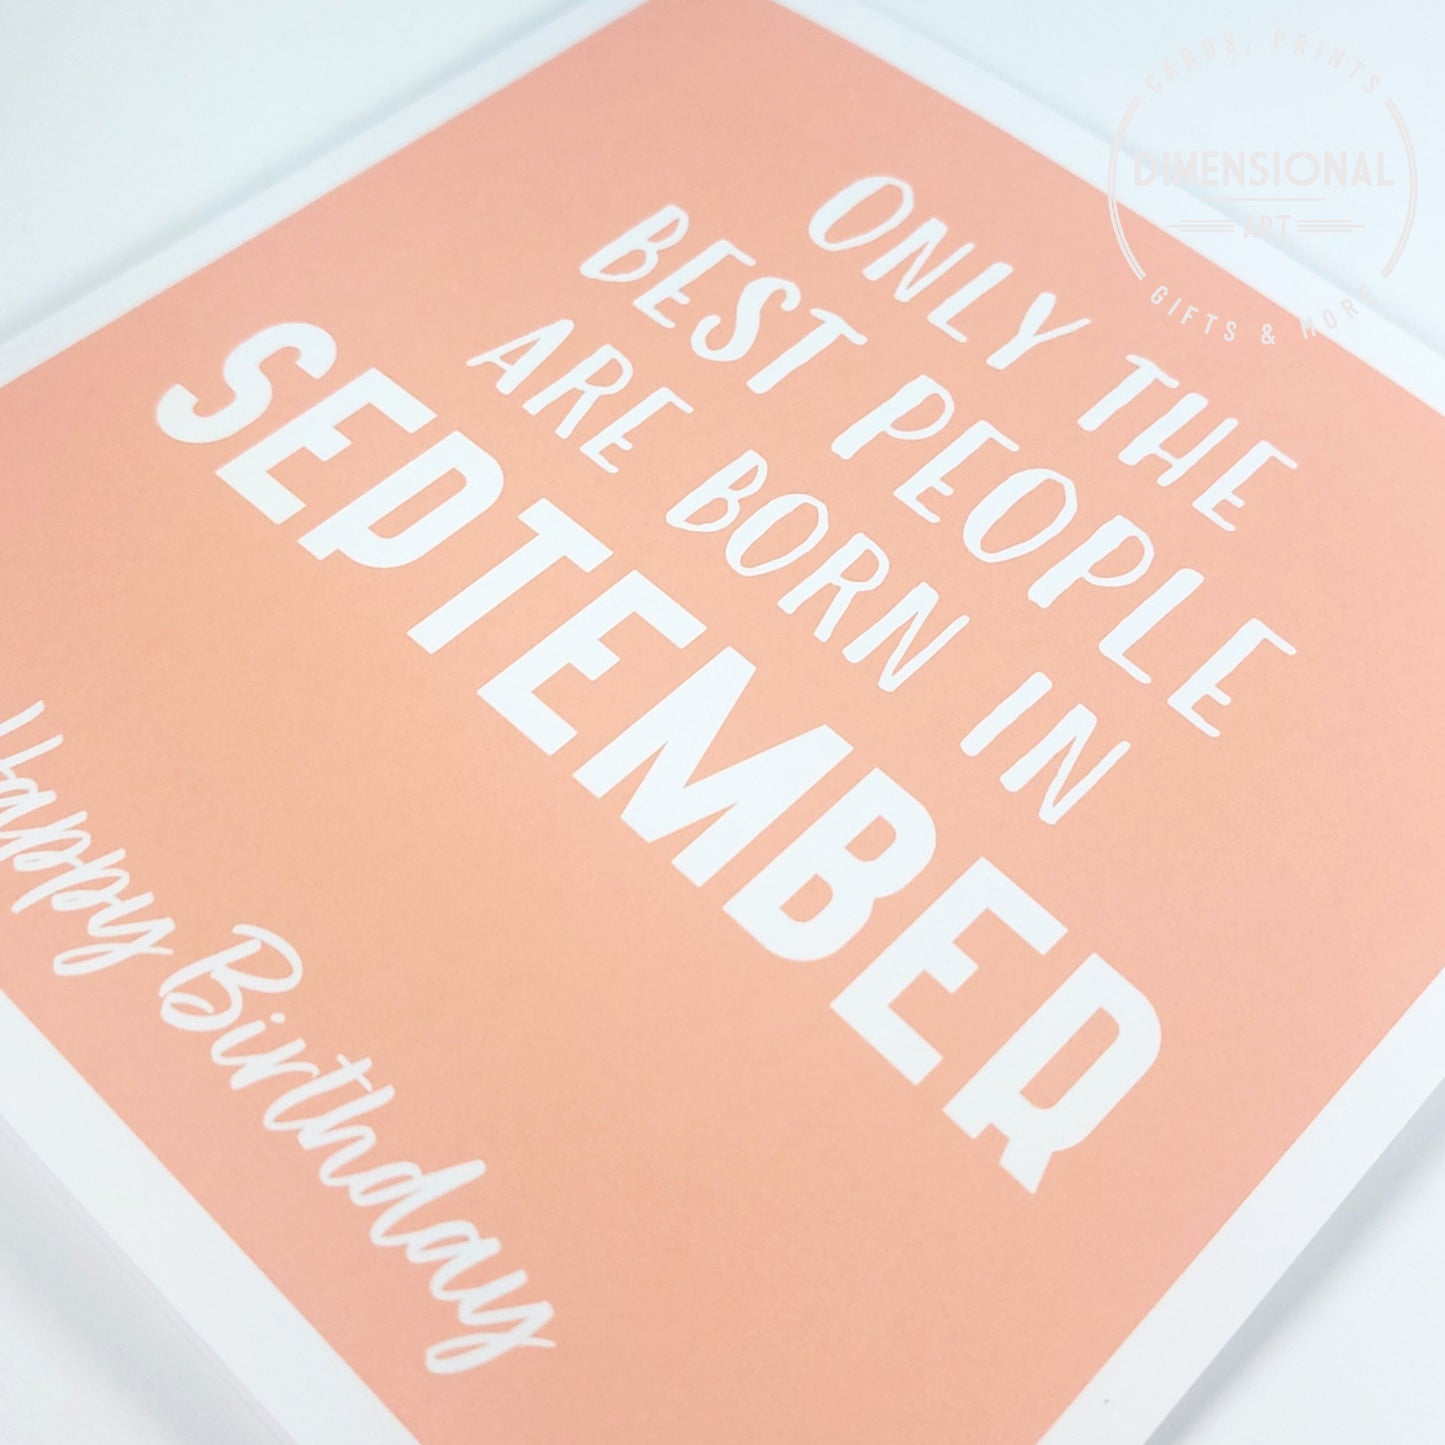 Best people are born in SEPTEMBER - Birthday Card